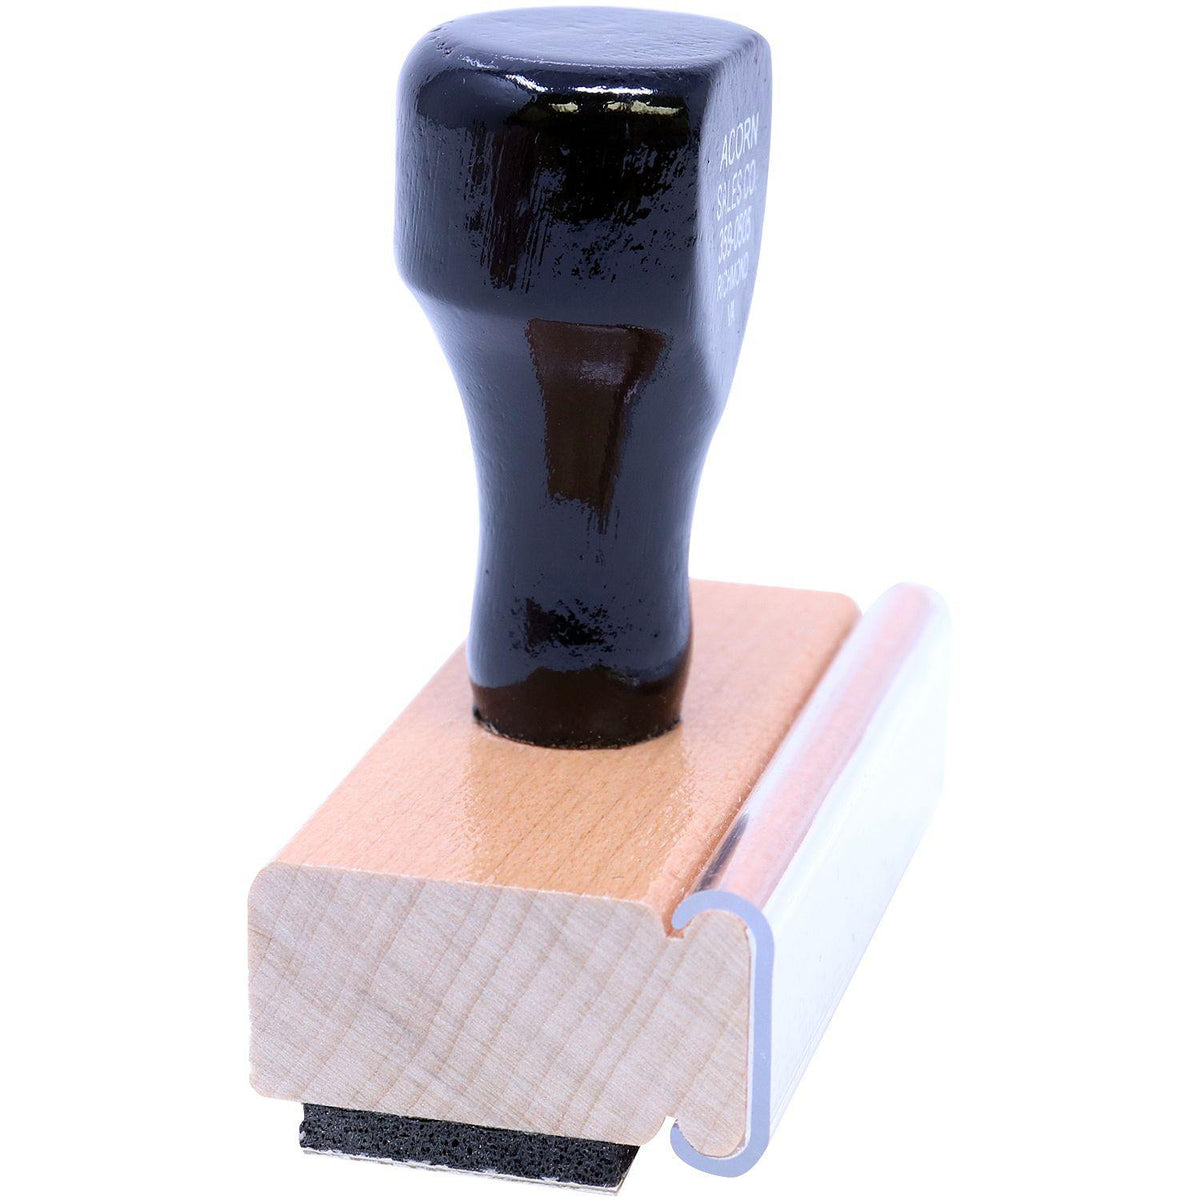 Side View of Two Thumbs Up Rubber Stamp at an Angle